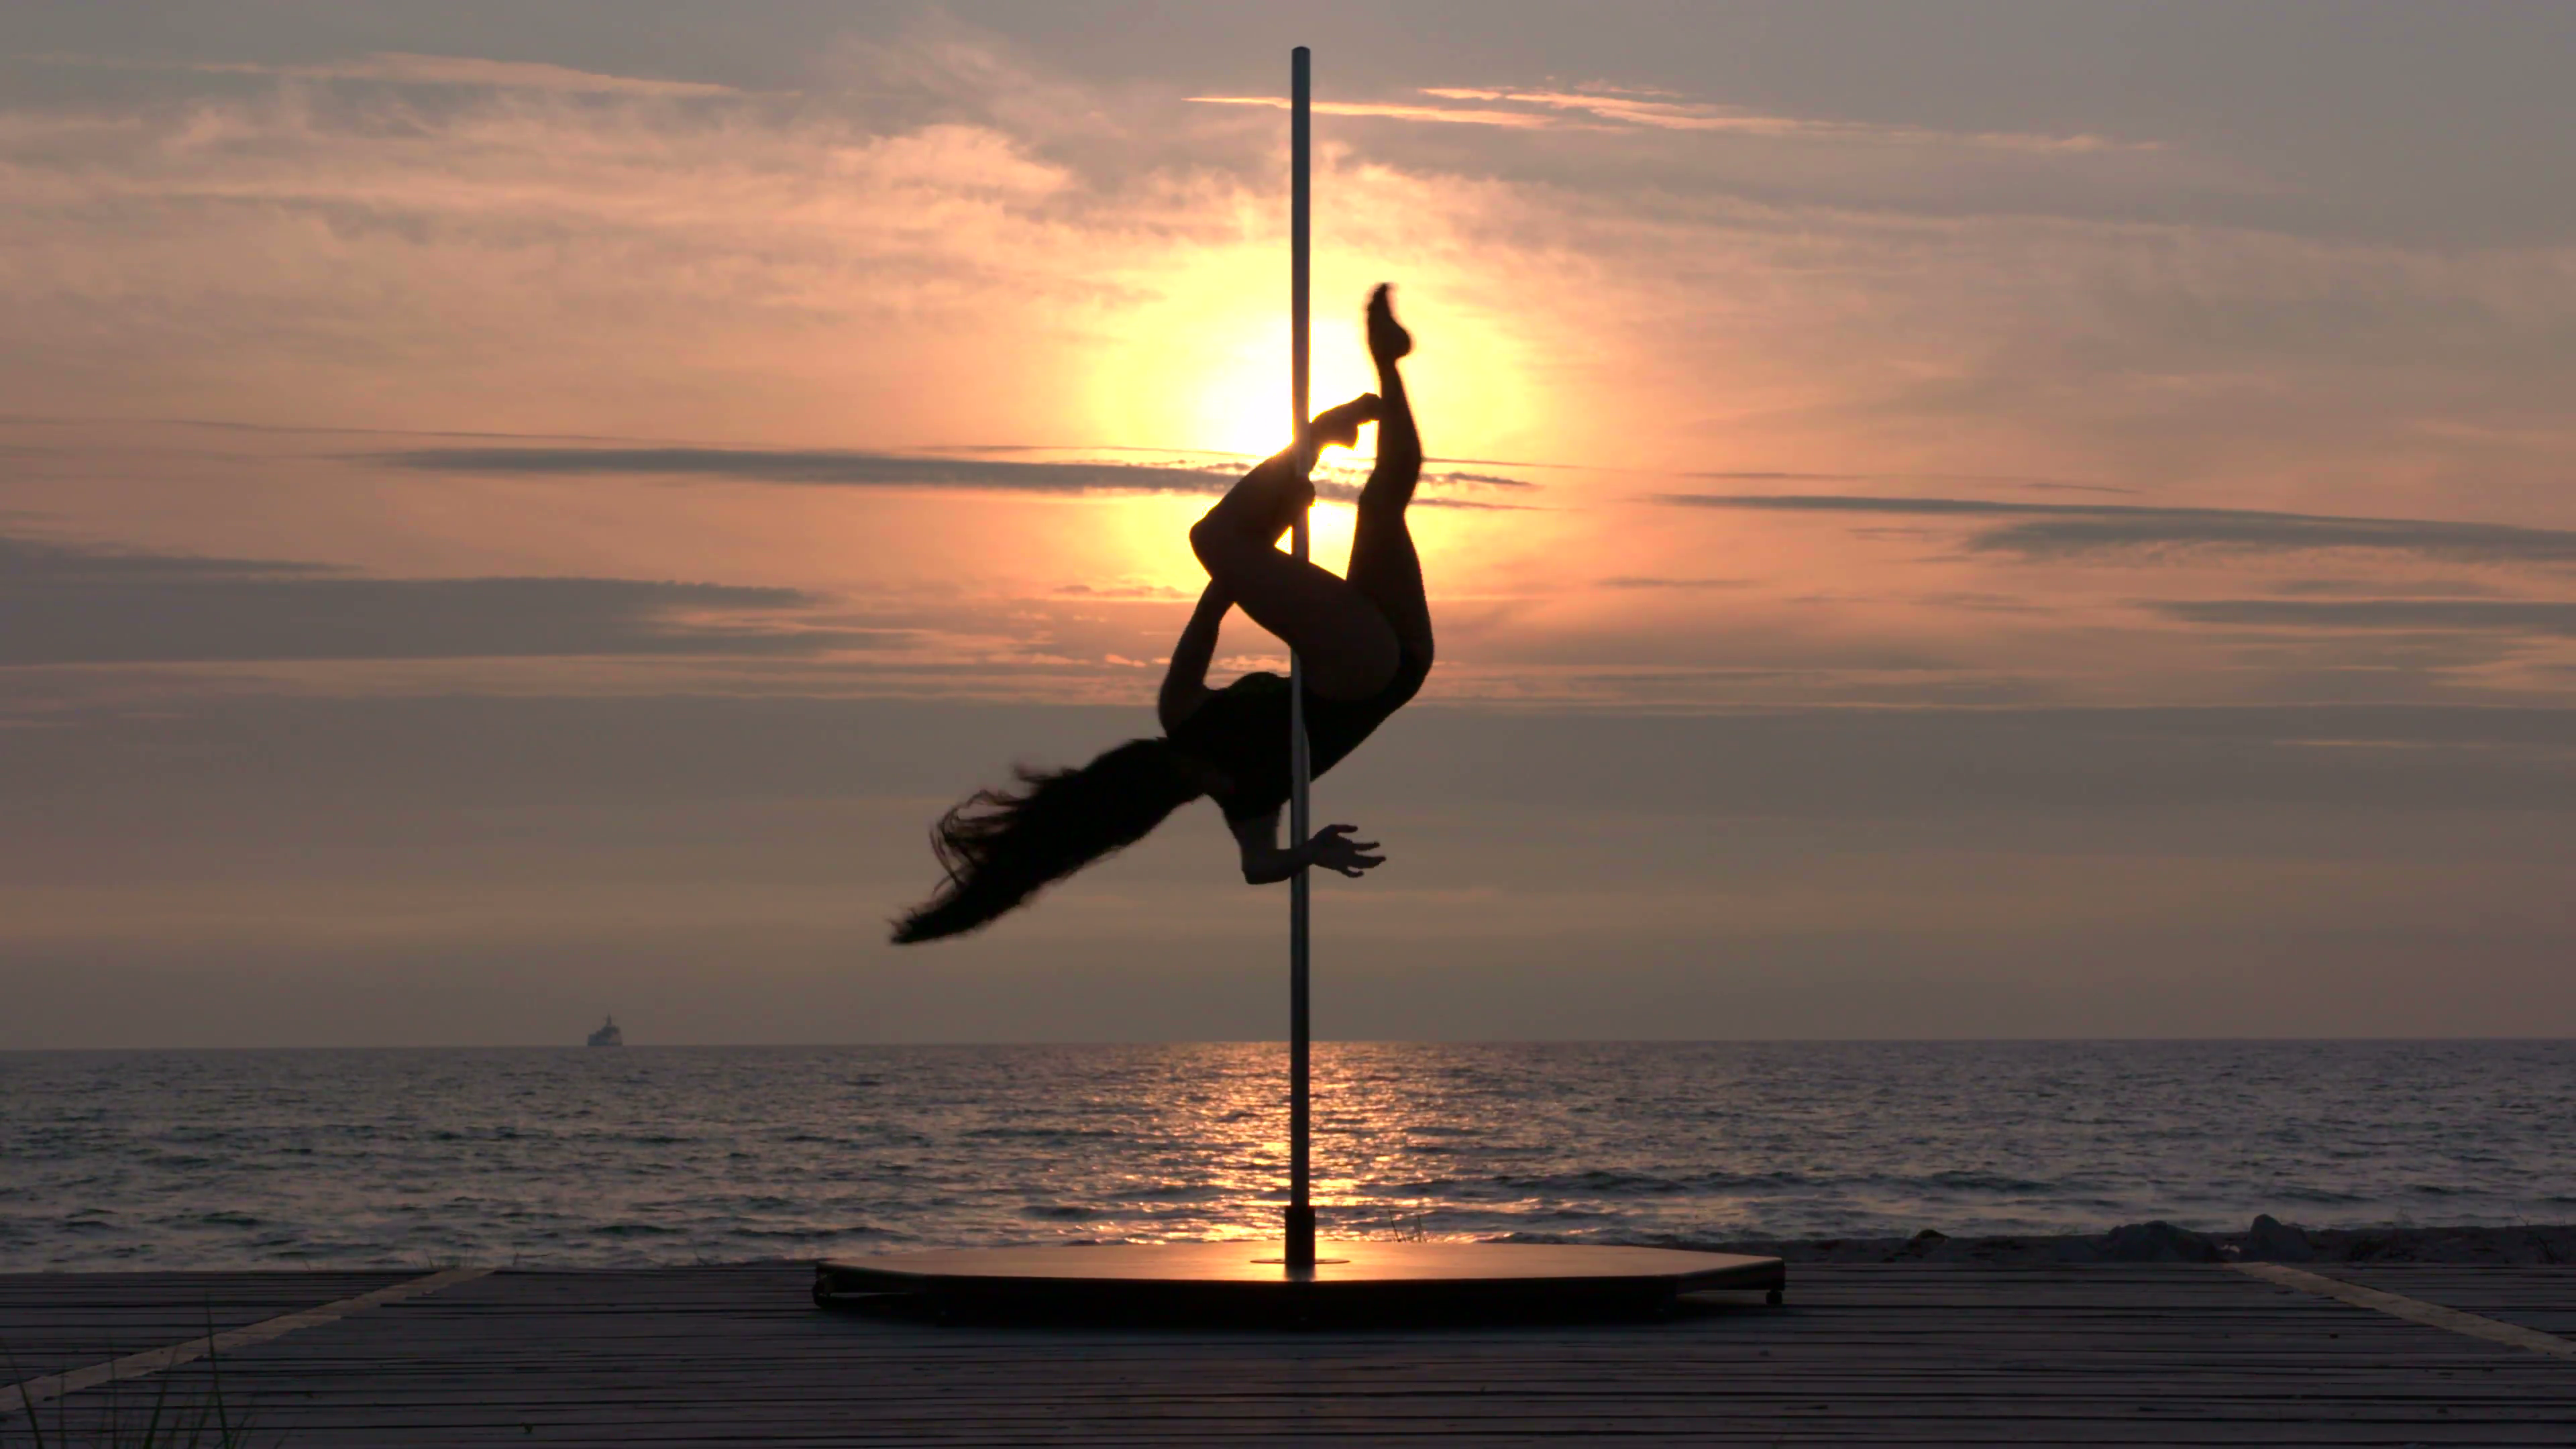 spinning-silhouette-of-girl-pole-dancer-against-the-glowing-sun-setting-in-the-sky-professional-poledancer-performing-tricks-and-spins-during-fitness-pole-dance-on-the-beach-part_s7_hwztpg-1i__F0007.png